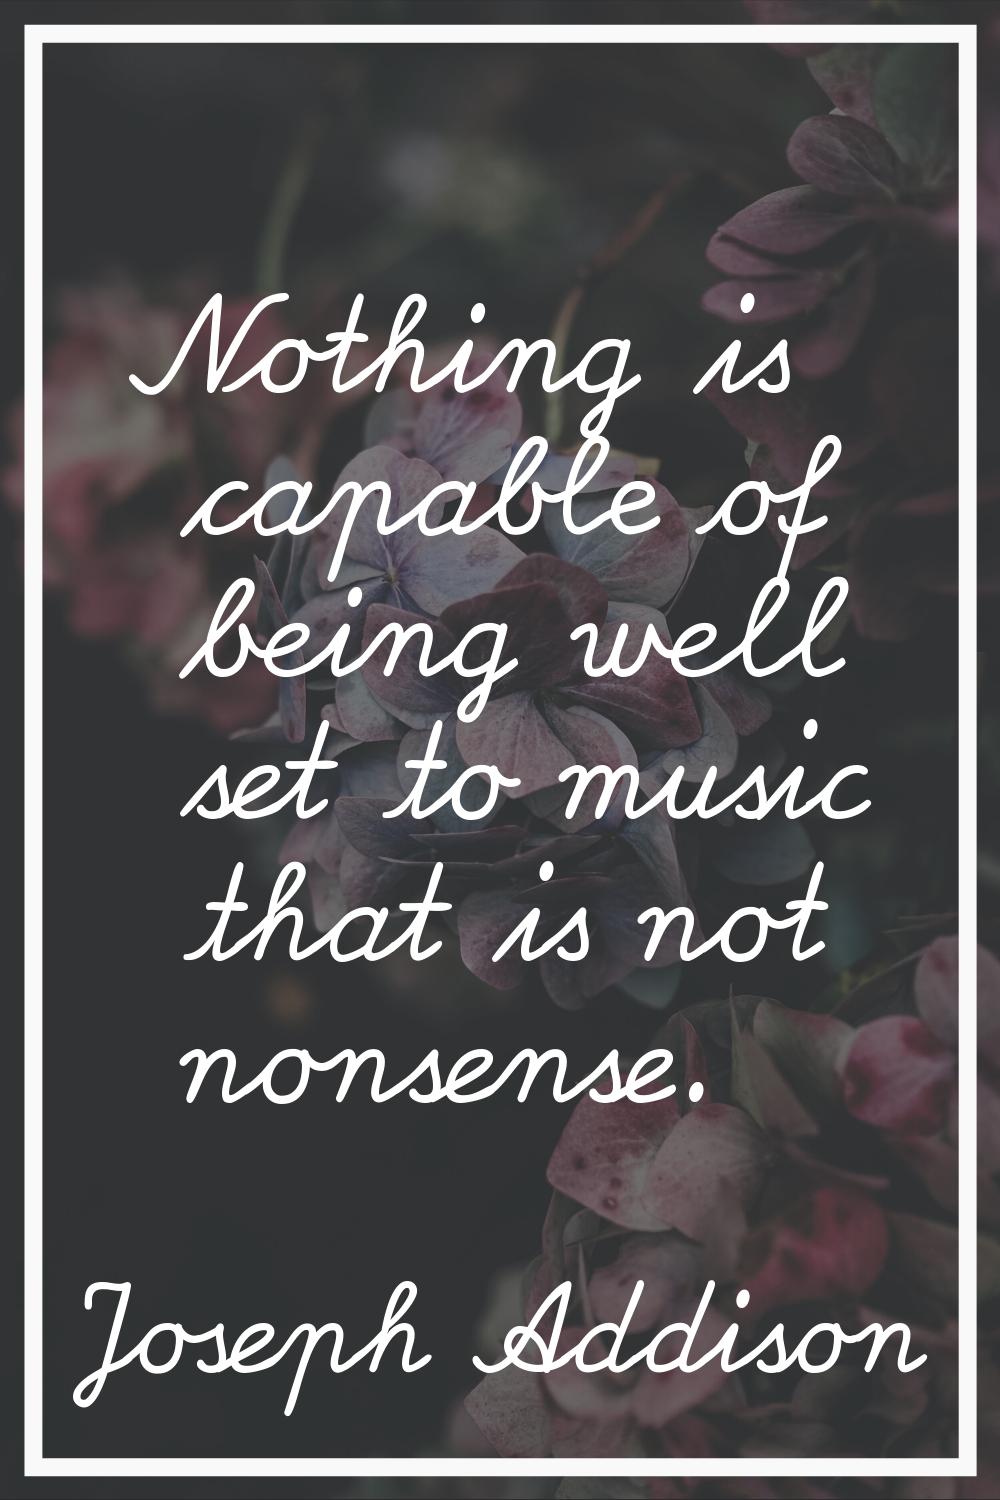 Nothing is capable of being well set to music that is not nonsense.